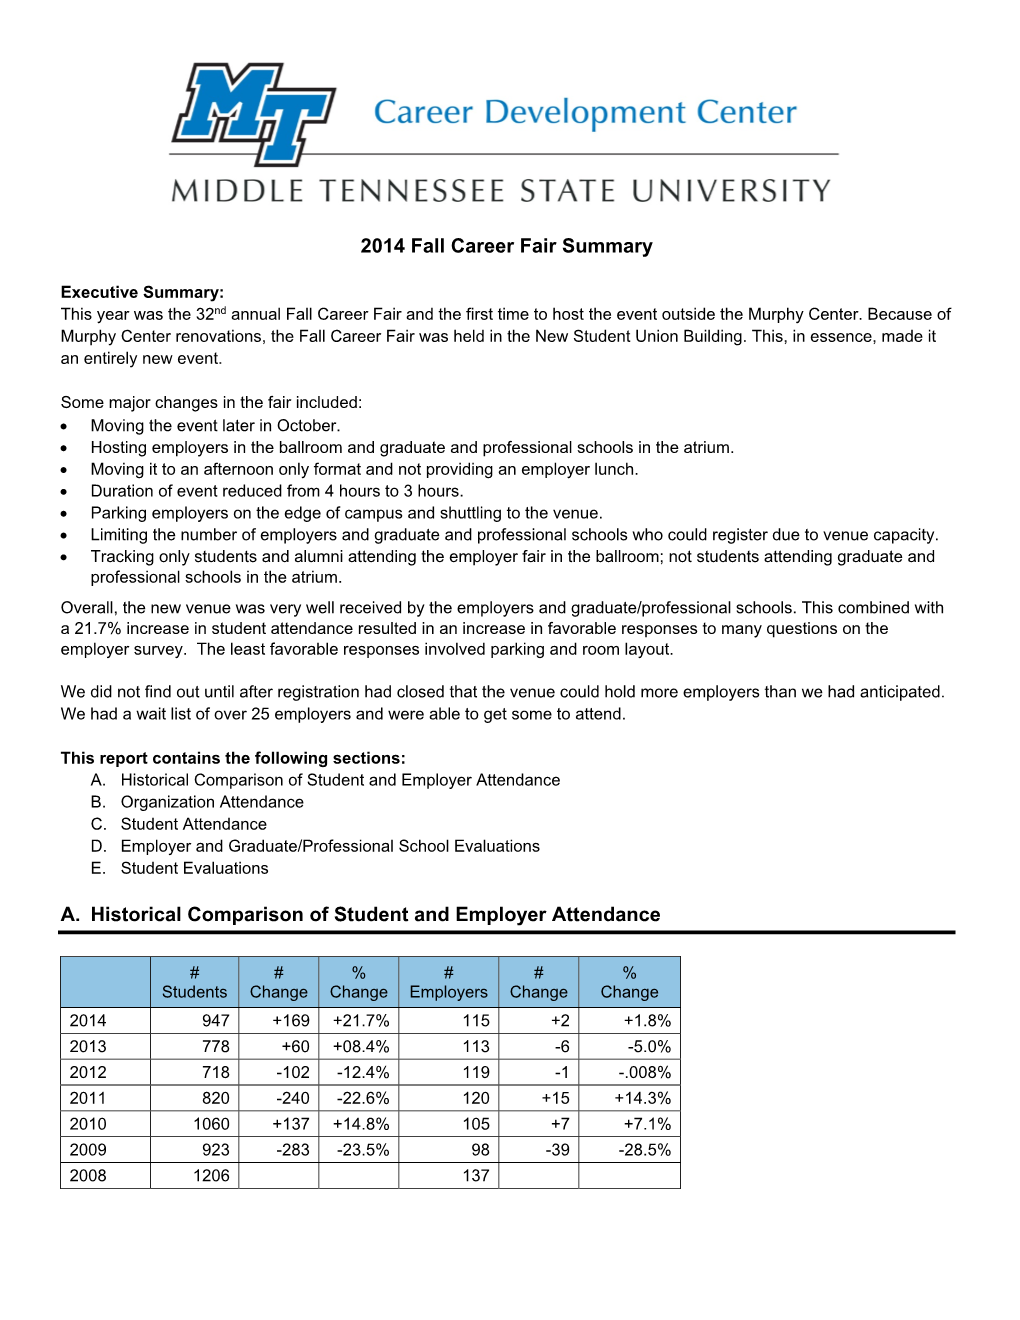 2014 Fall Career Fair Summary A. Historical Comparison of Student and Employer Attendance